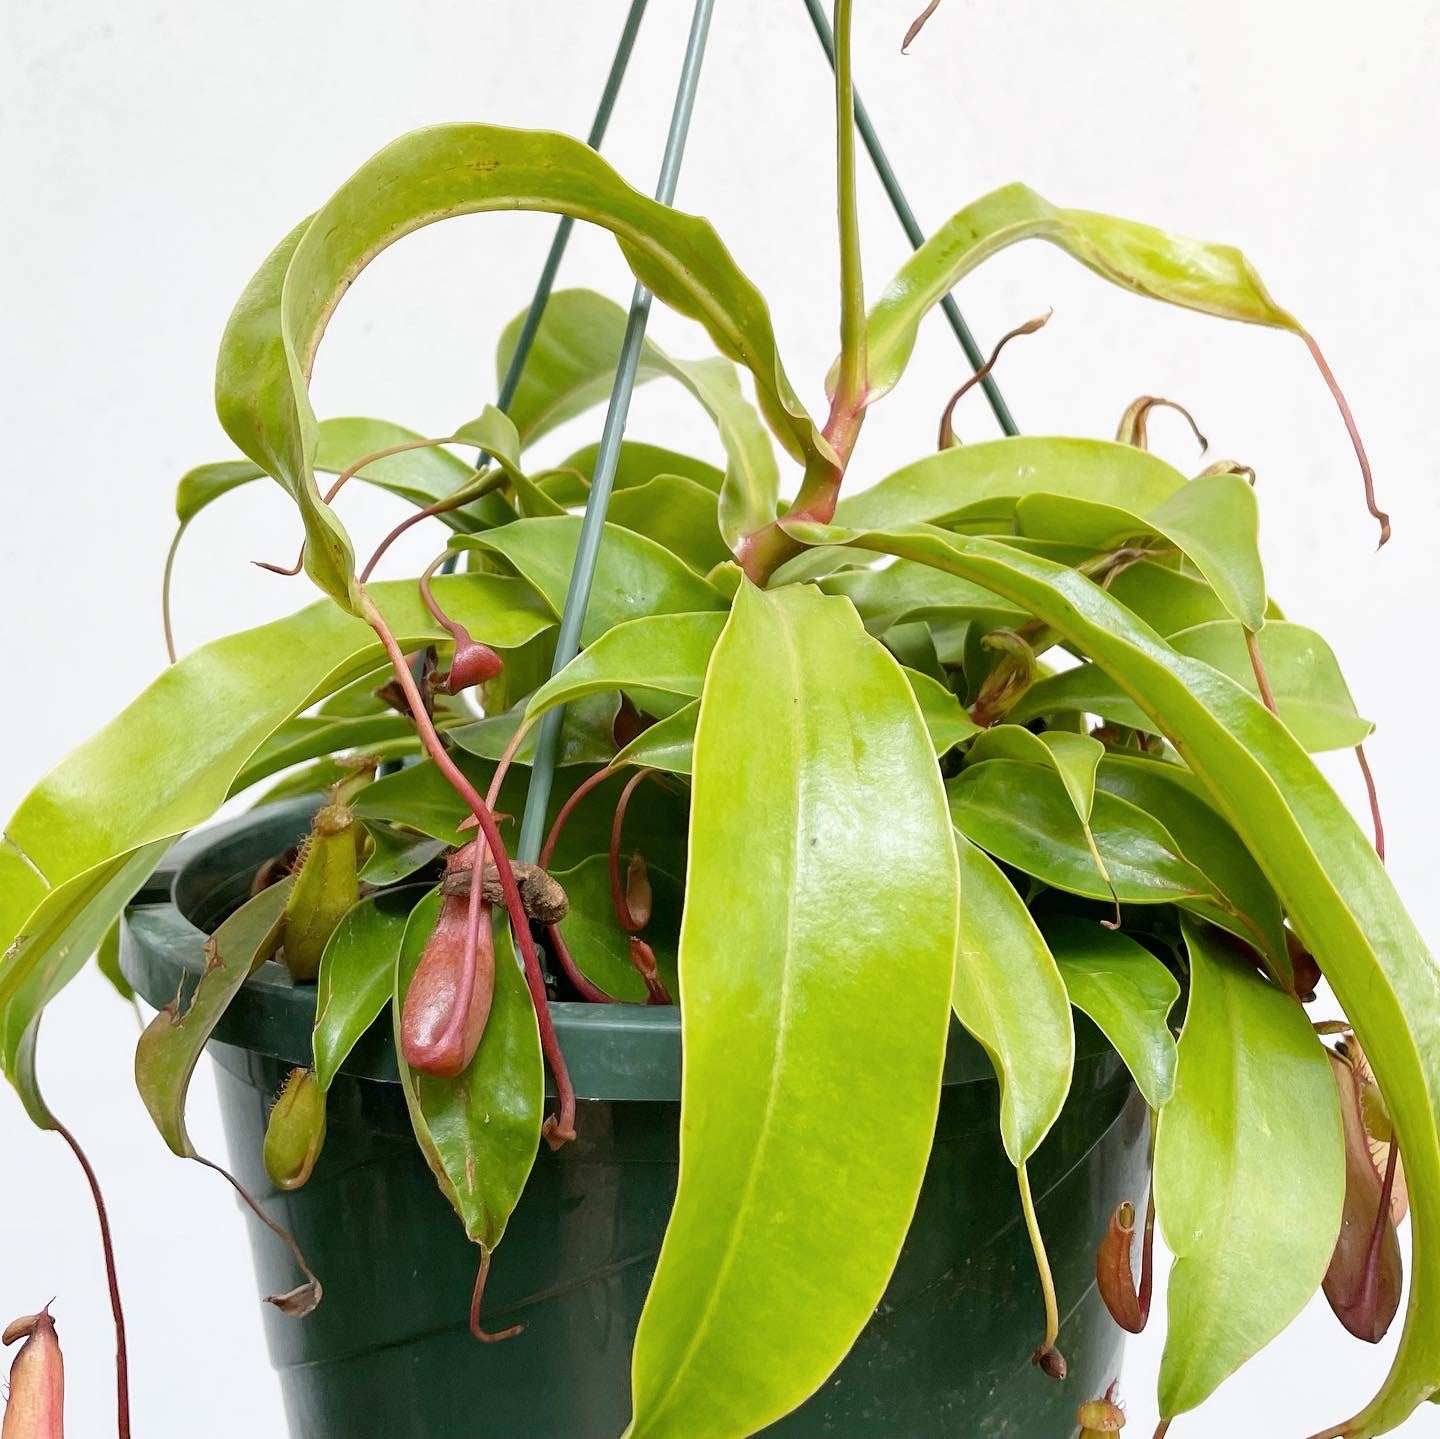 Nepenthes alata - Pitcher Plant